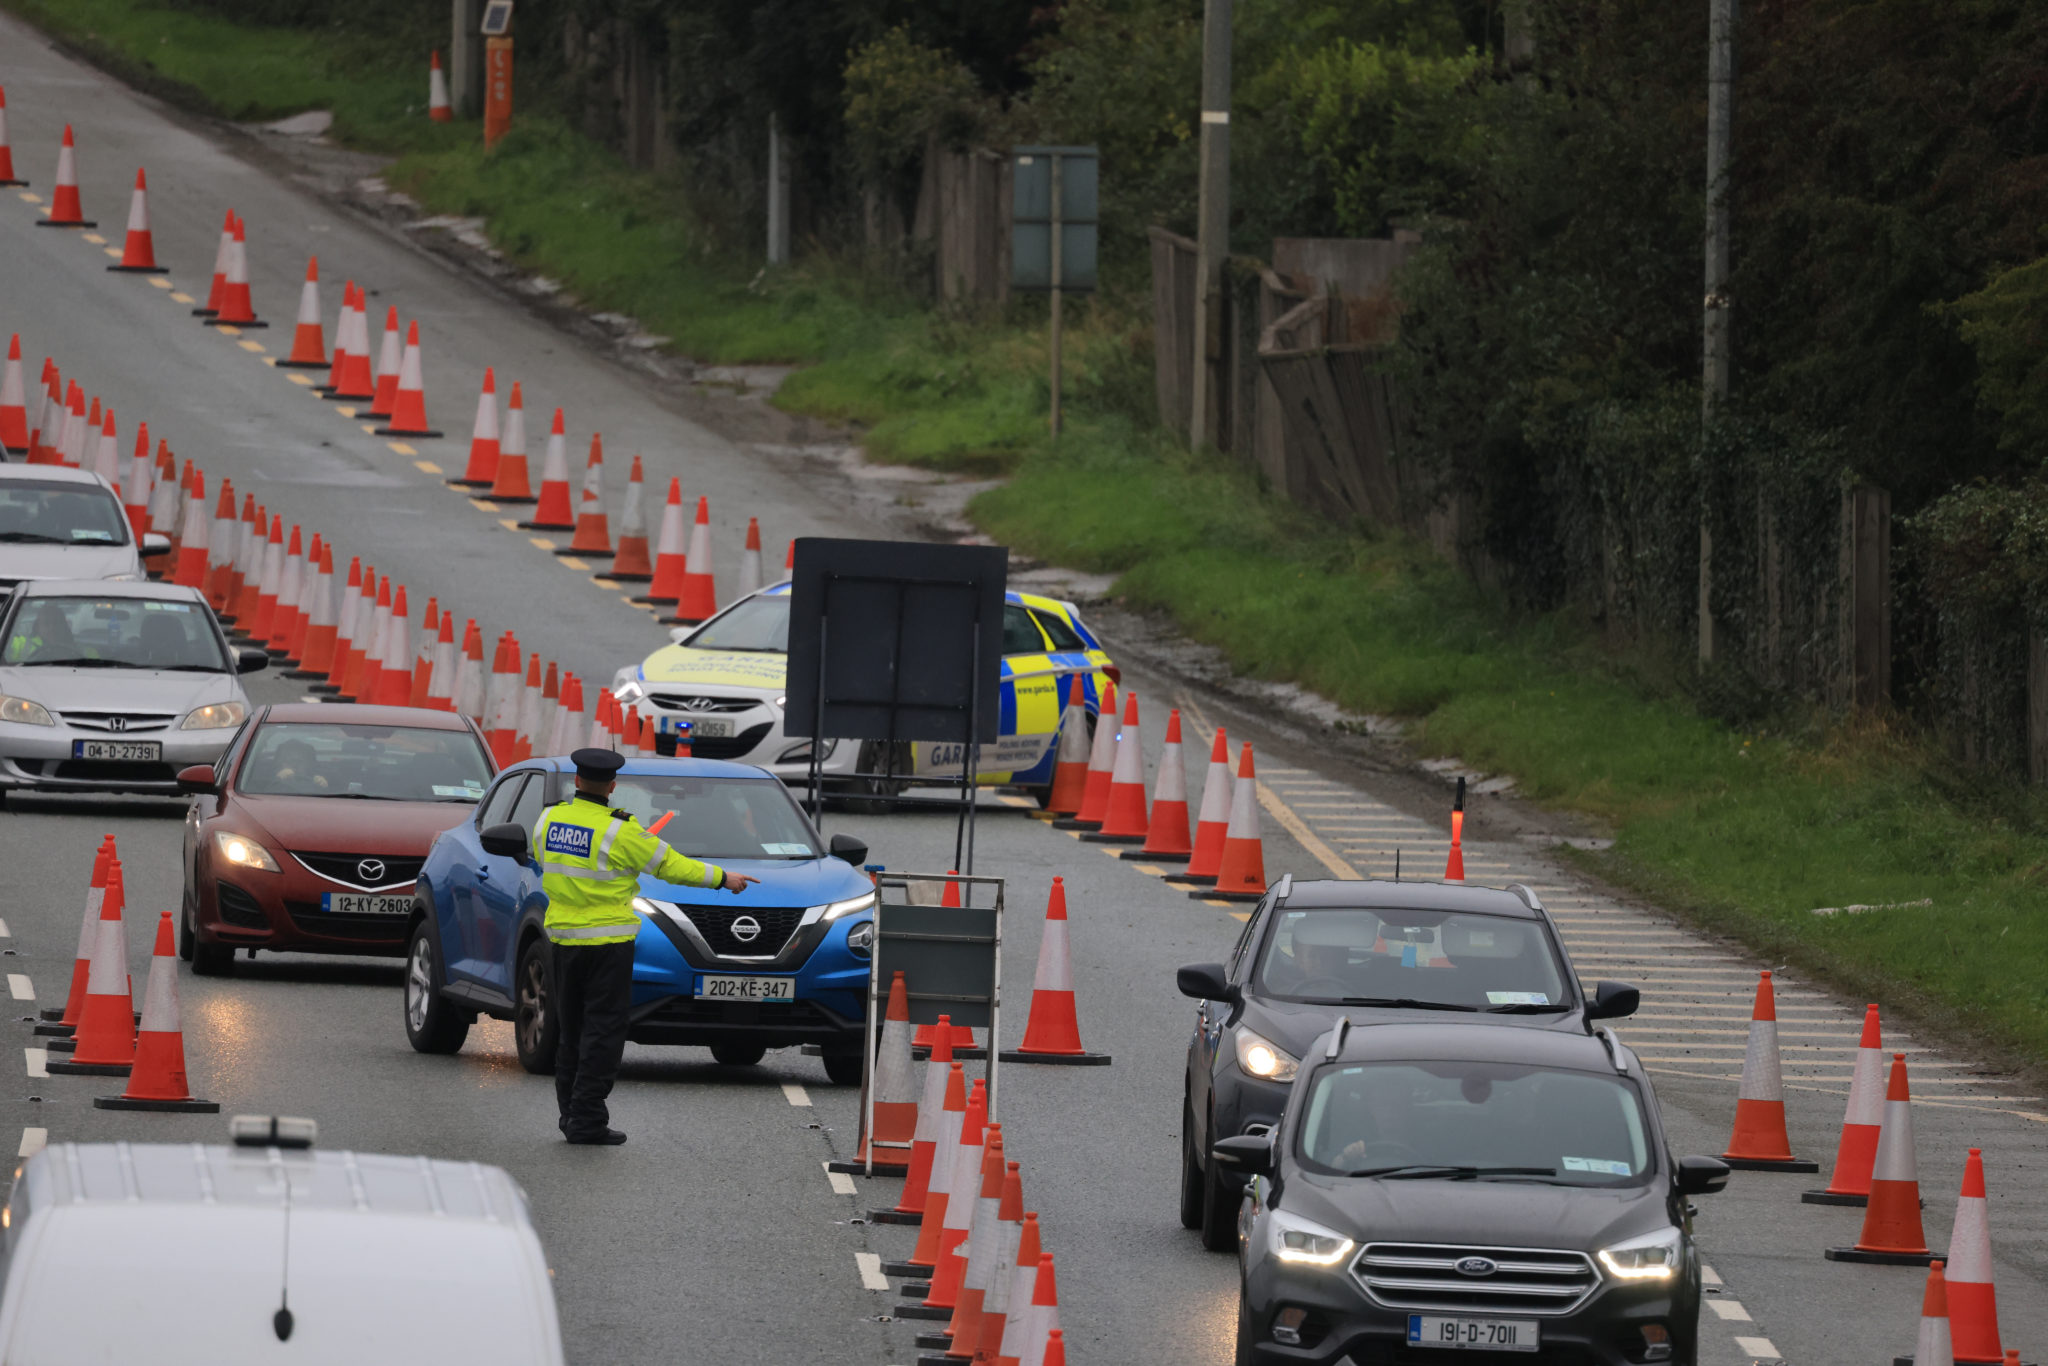 South bound traffic on the N7 at a garda COVID-19 checkpoint at Castlewarden.